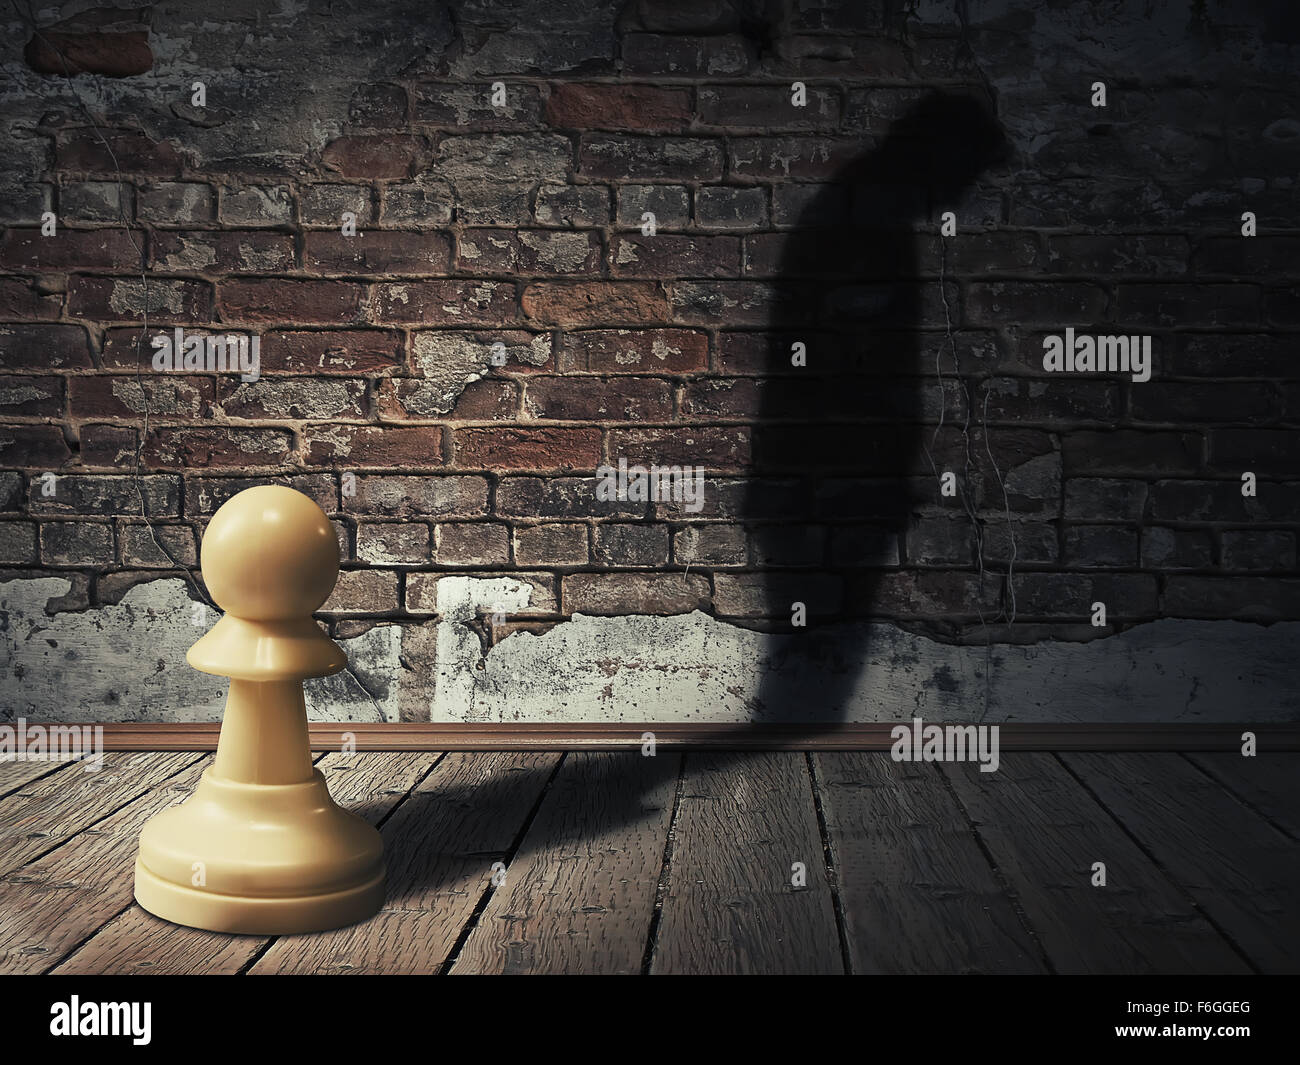 A white pawn piece into a dark room with its man silhouette shadow on a brick wall Stock Photo